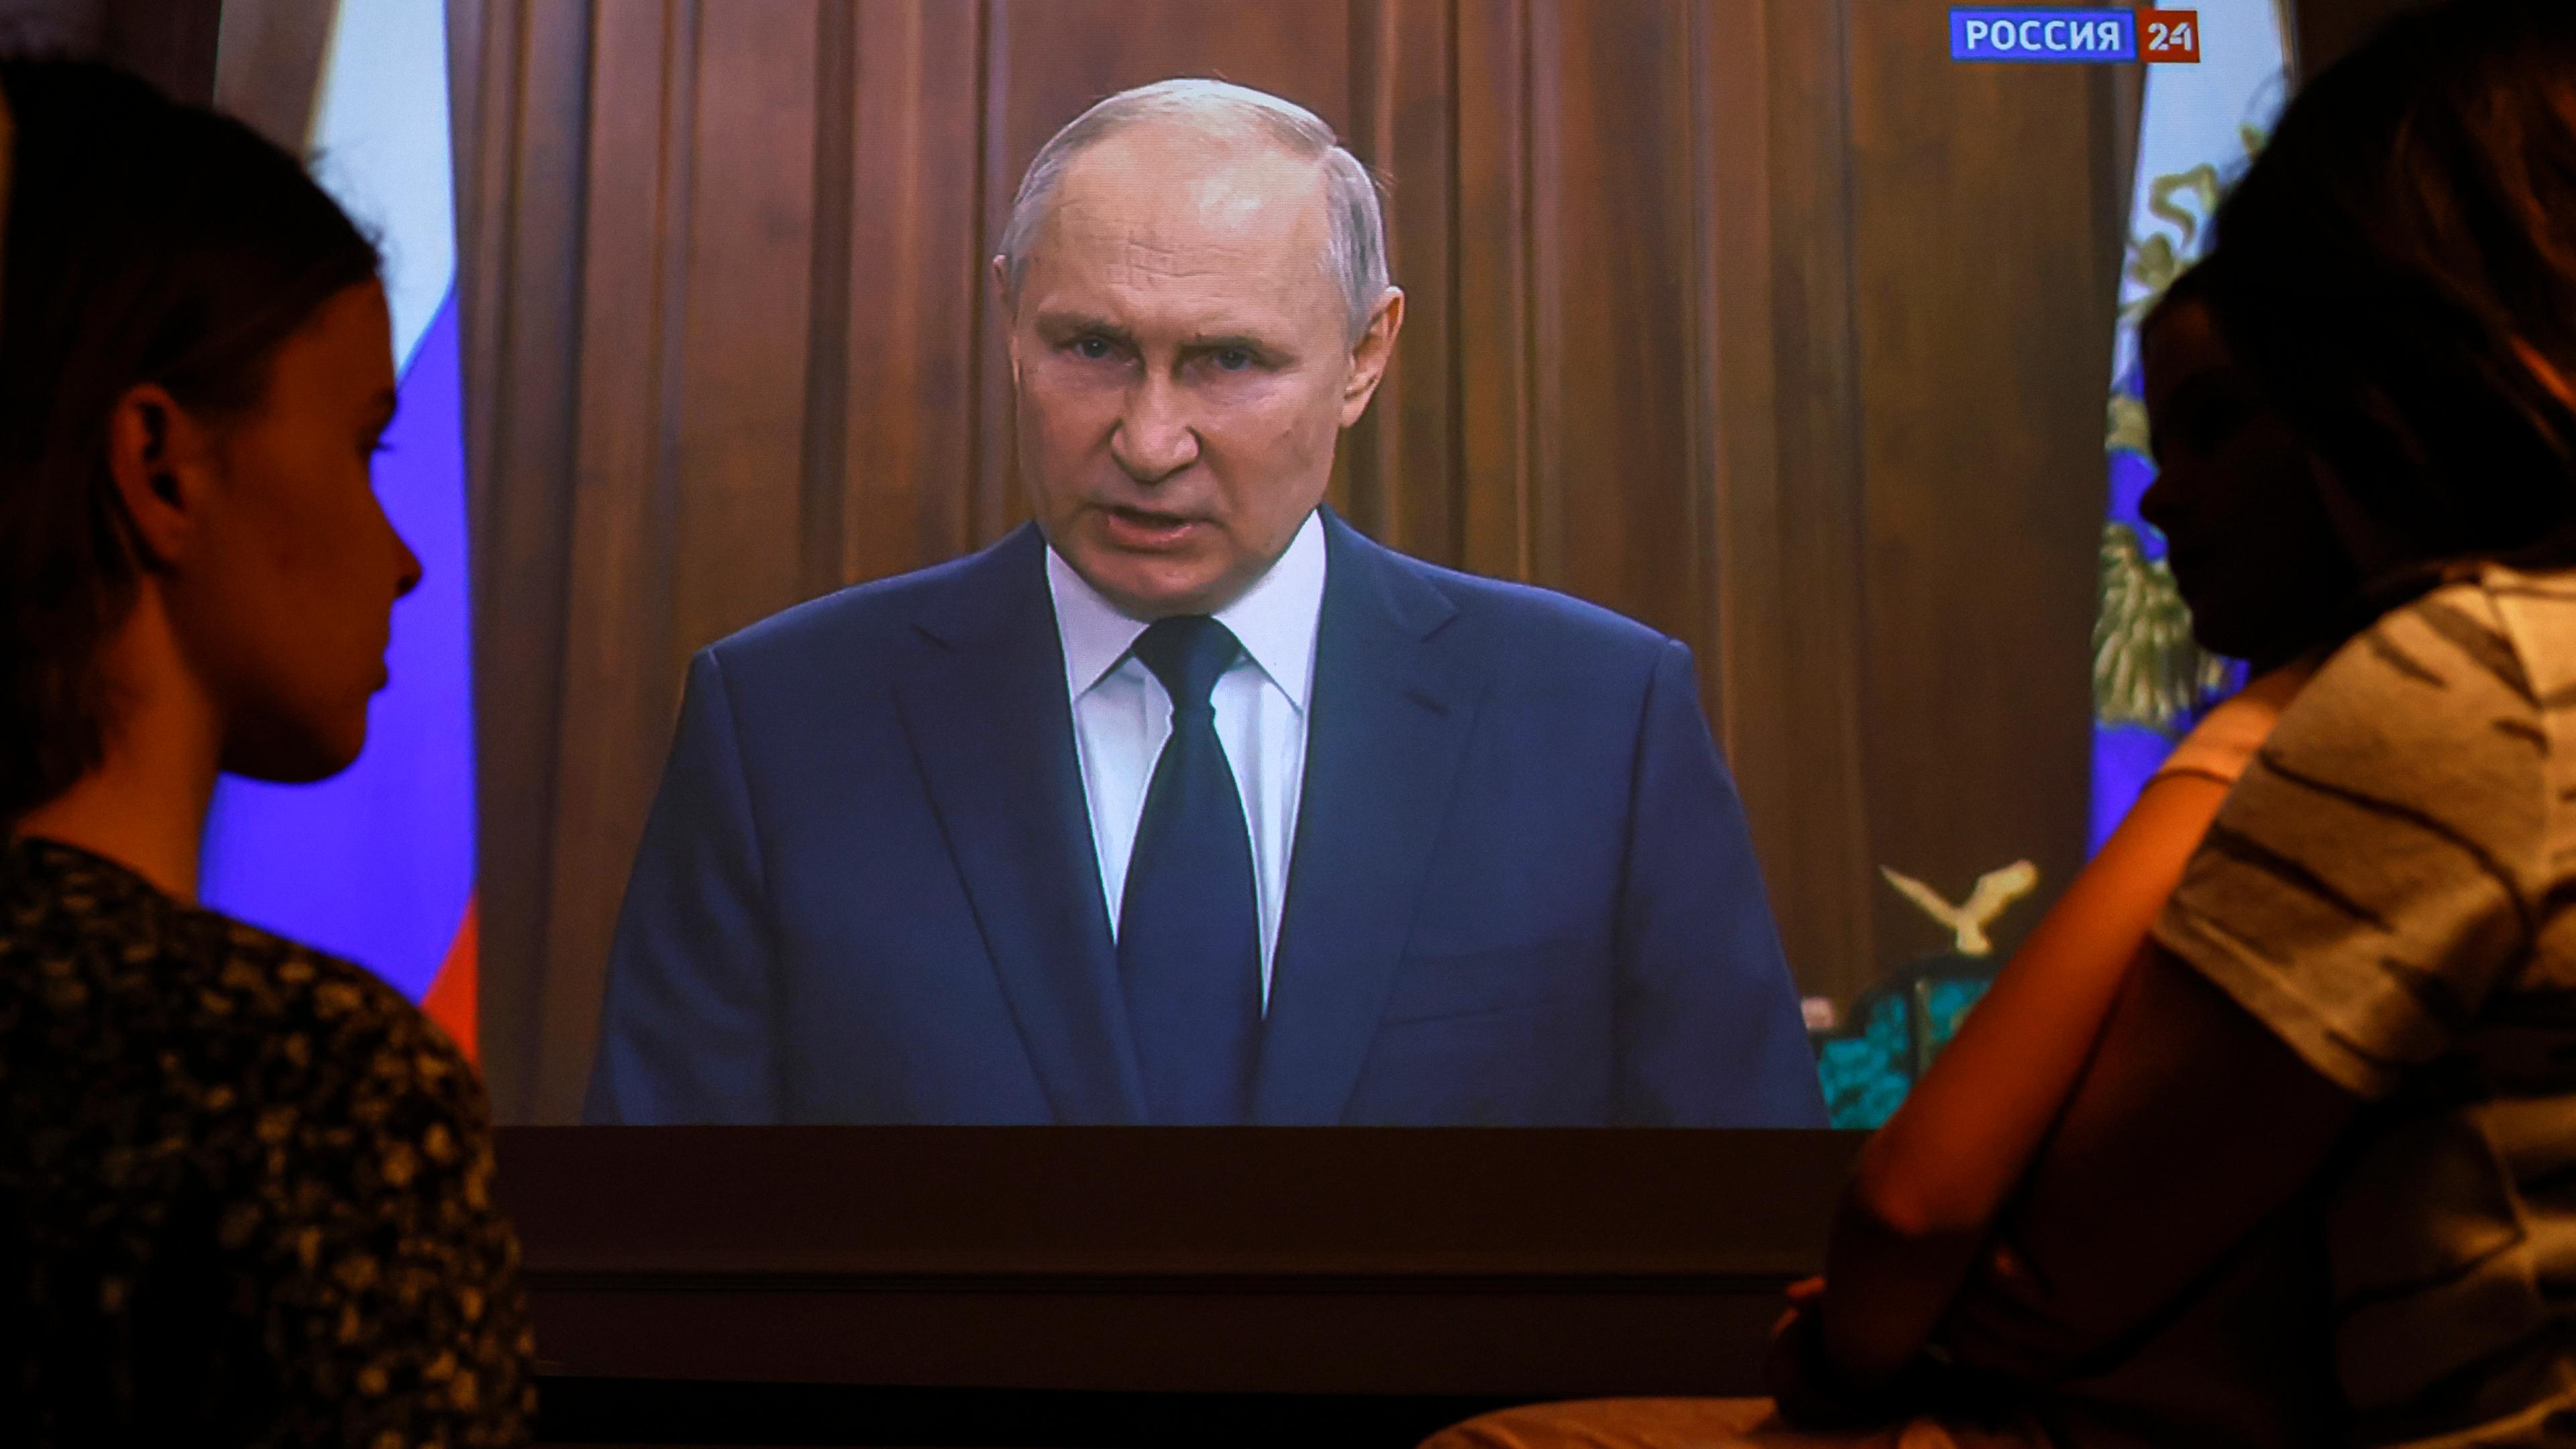 Russian President Putin video address to the Nation